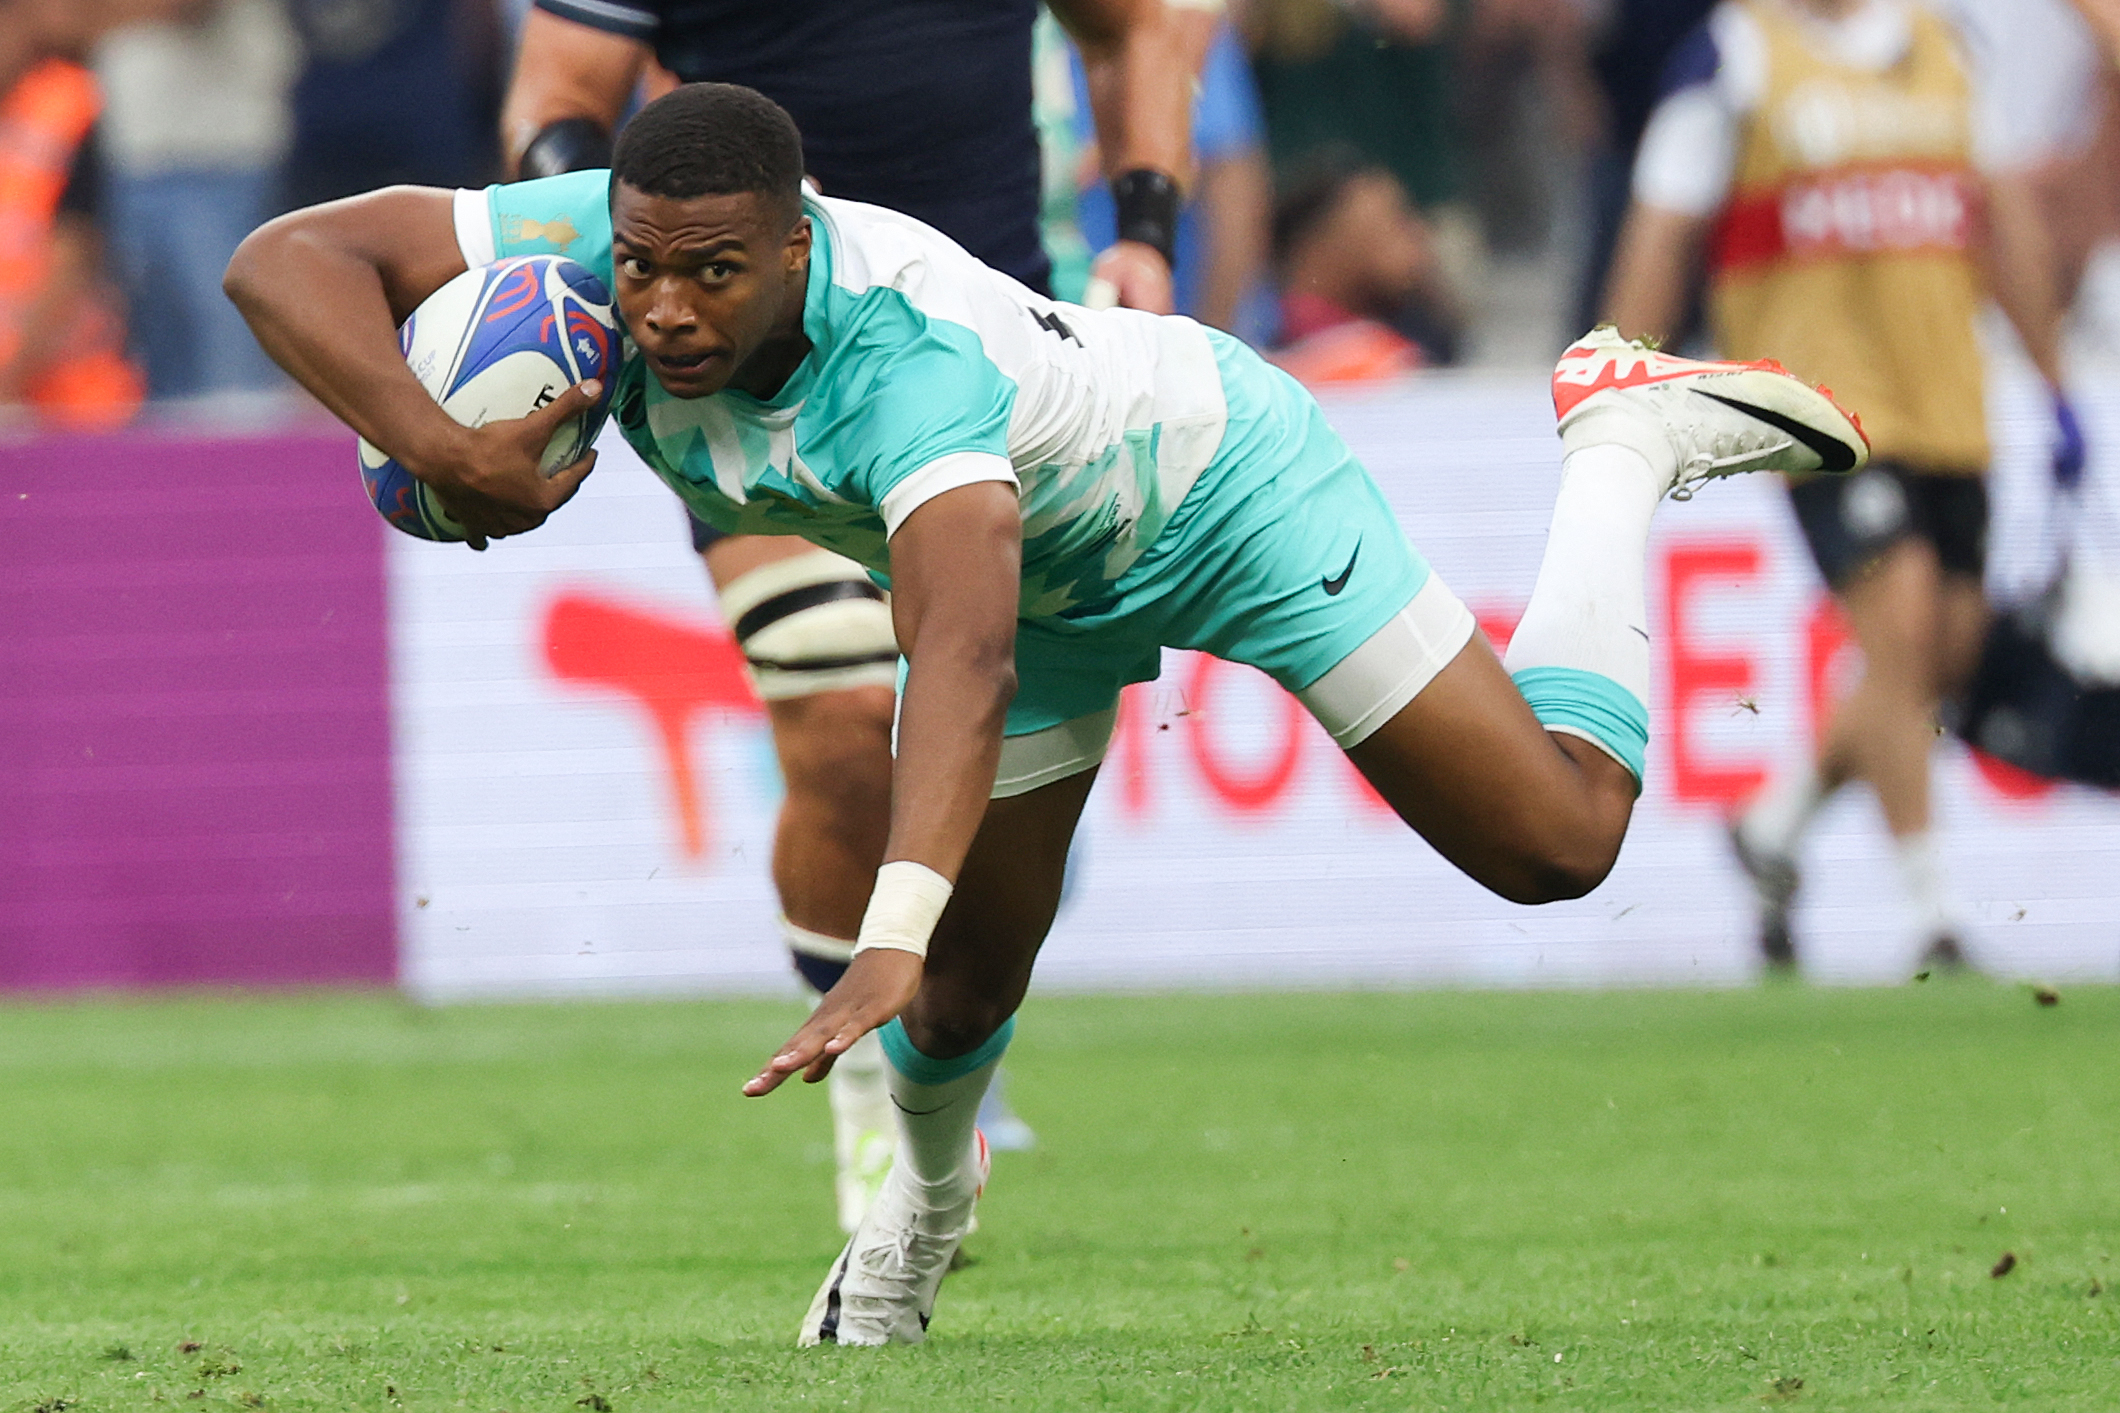 South Africa gets its Rugby World Cup title defense started against  Scotland. Chile makes its debut